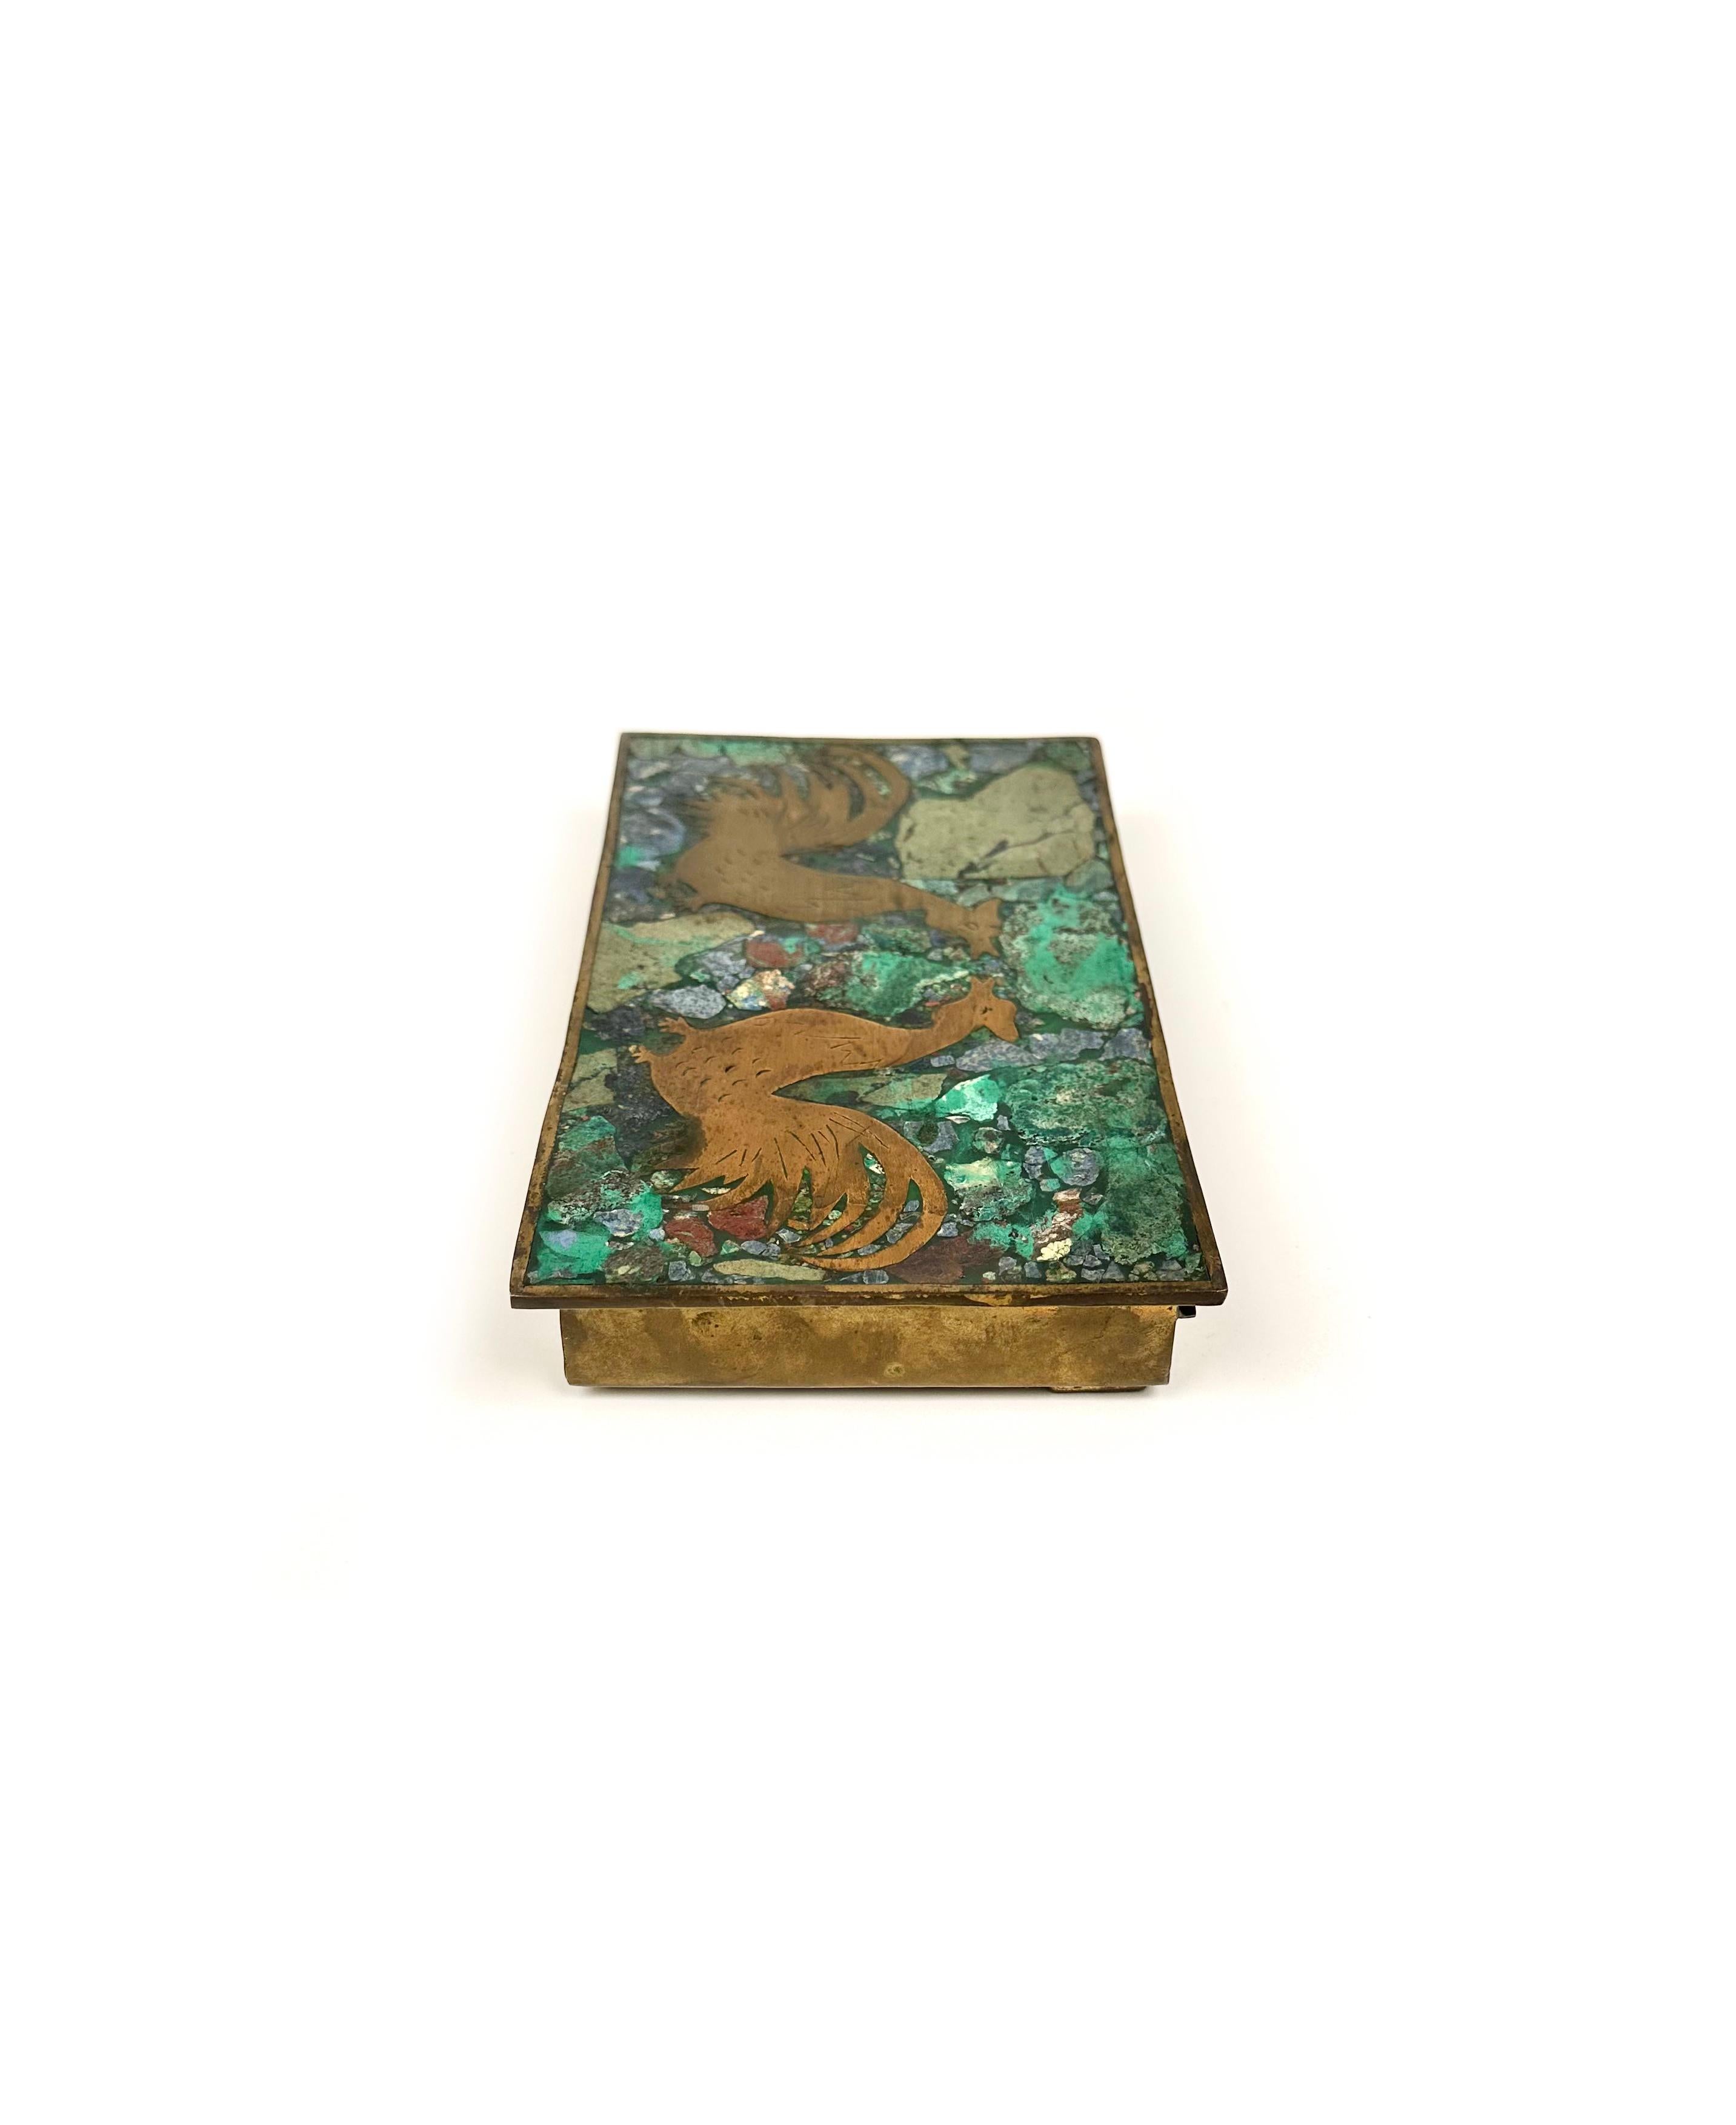 Decorative Cigar Box in Brass, Malachite and Wood, Mexico, 1960s For Sale 4